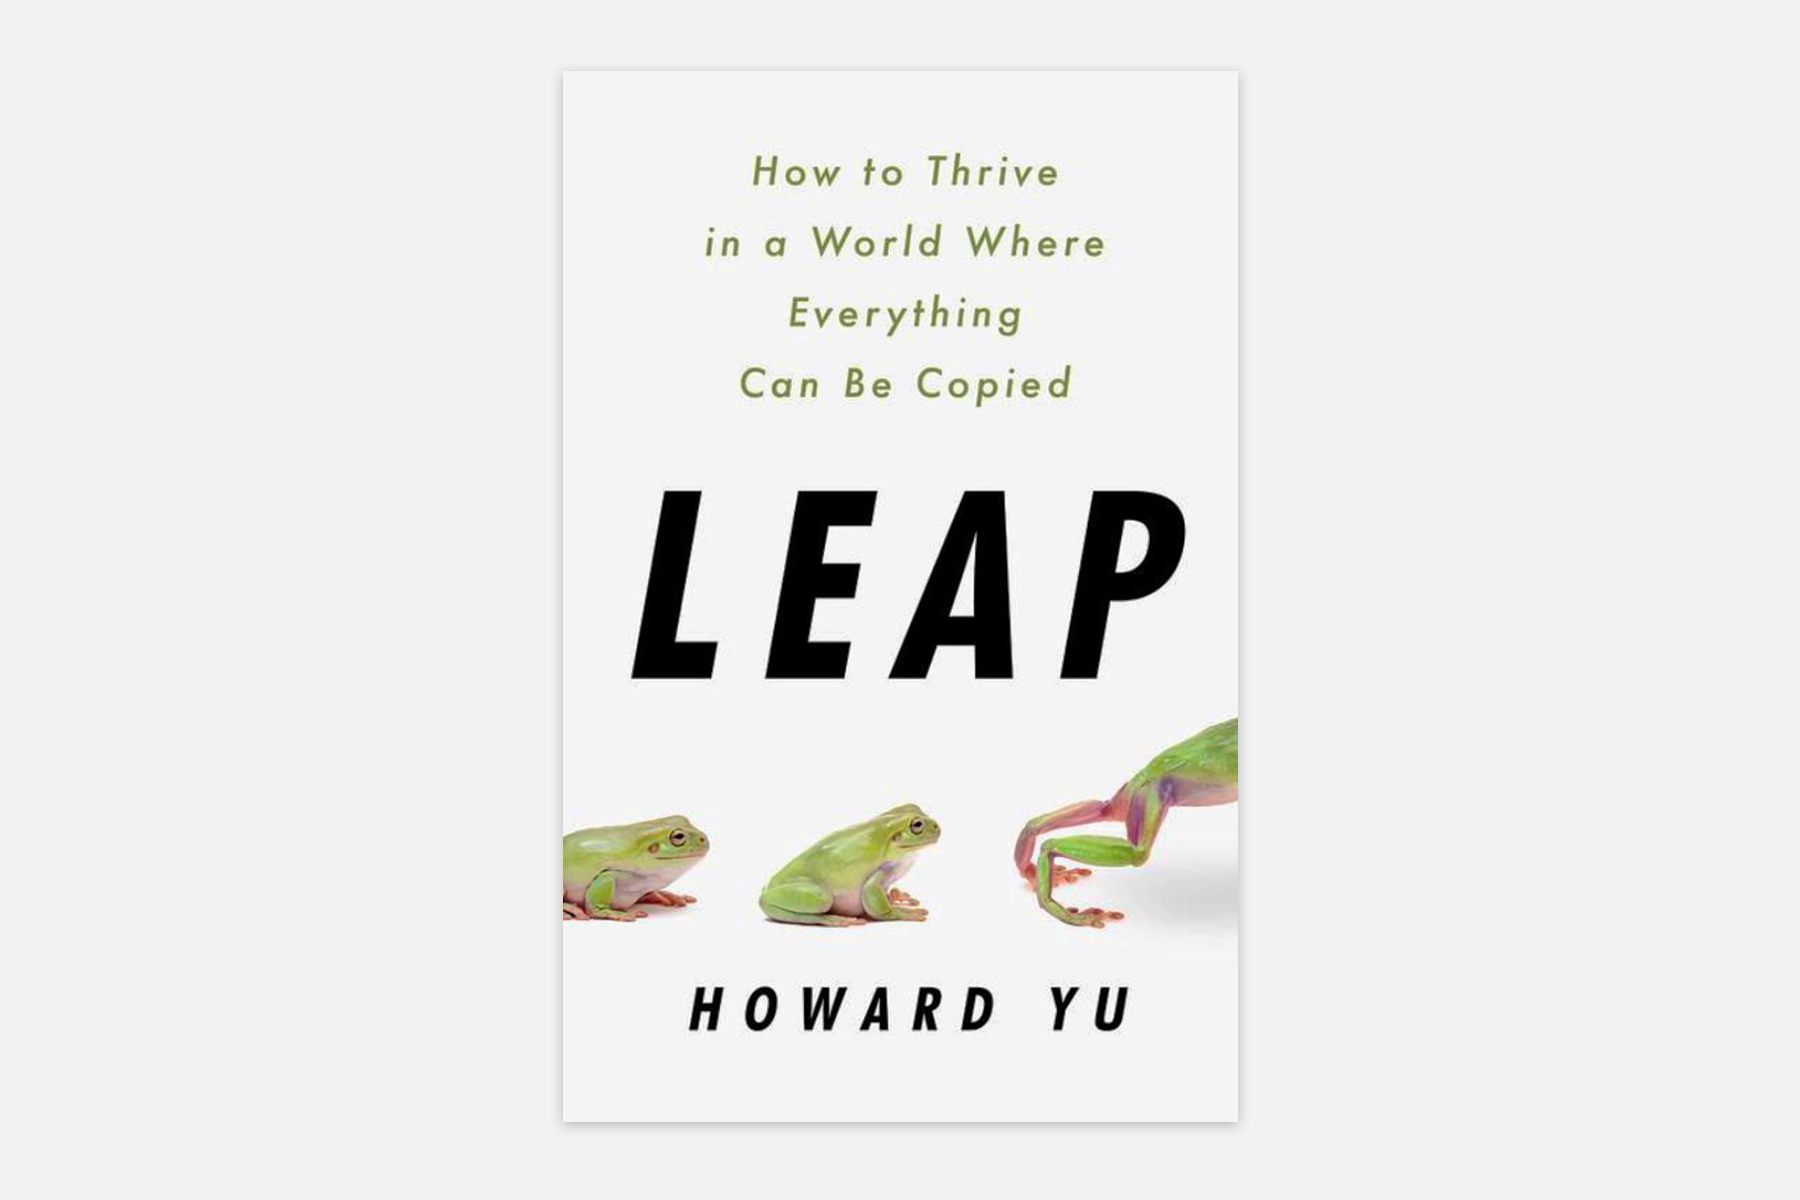 Leap: How to Thrive in a World Where Everything Can Be Copied by Howard Yu